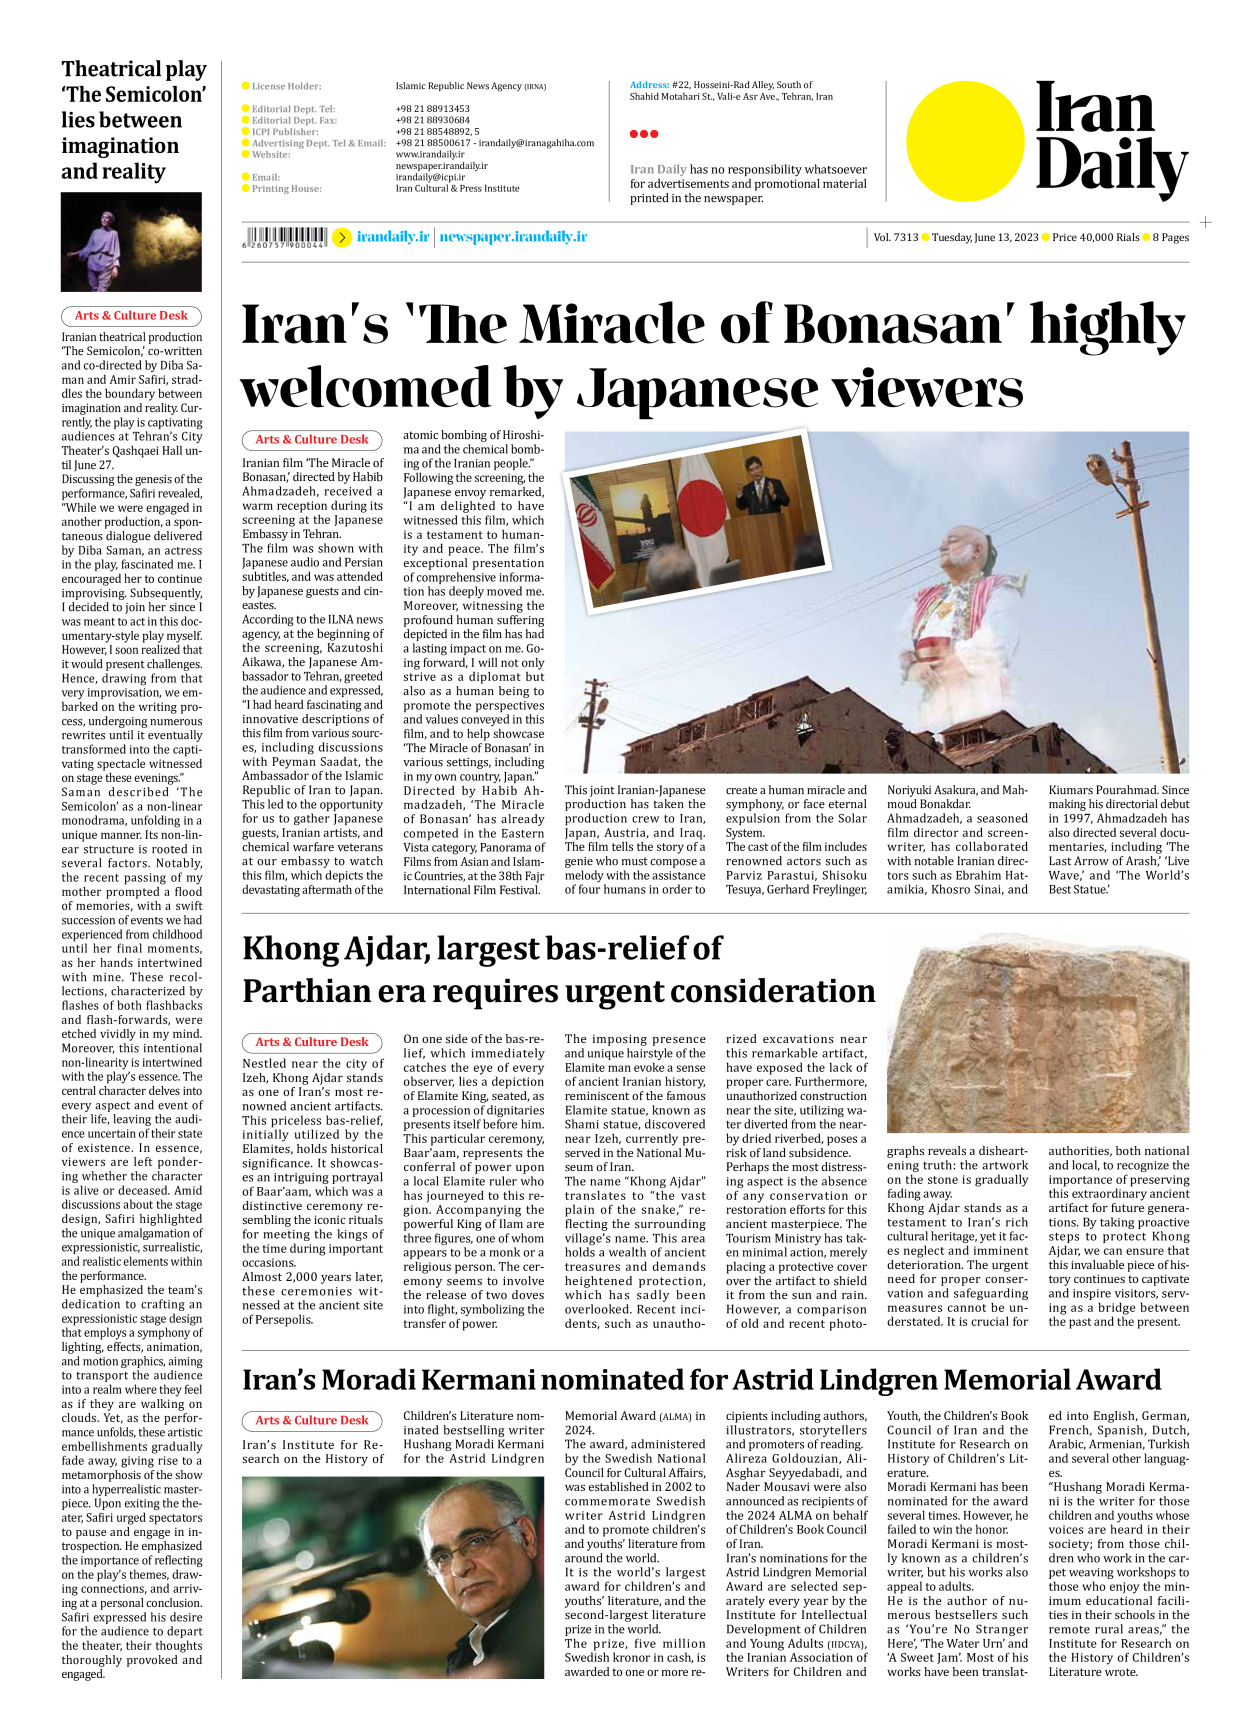 Iran Daily - Number Seven Thousand Three Hundred and Thirteen - 13 June 2023 - Page 8